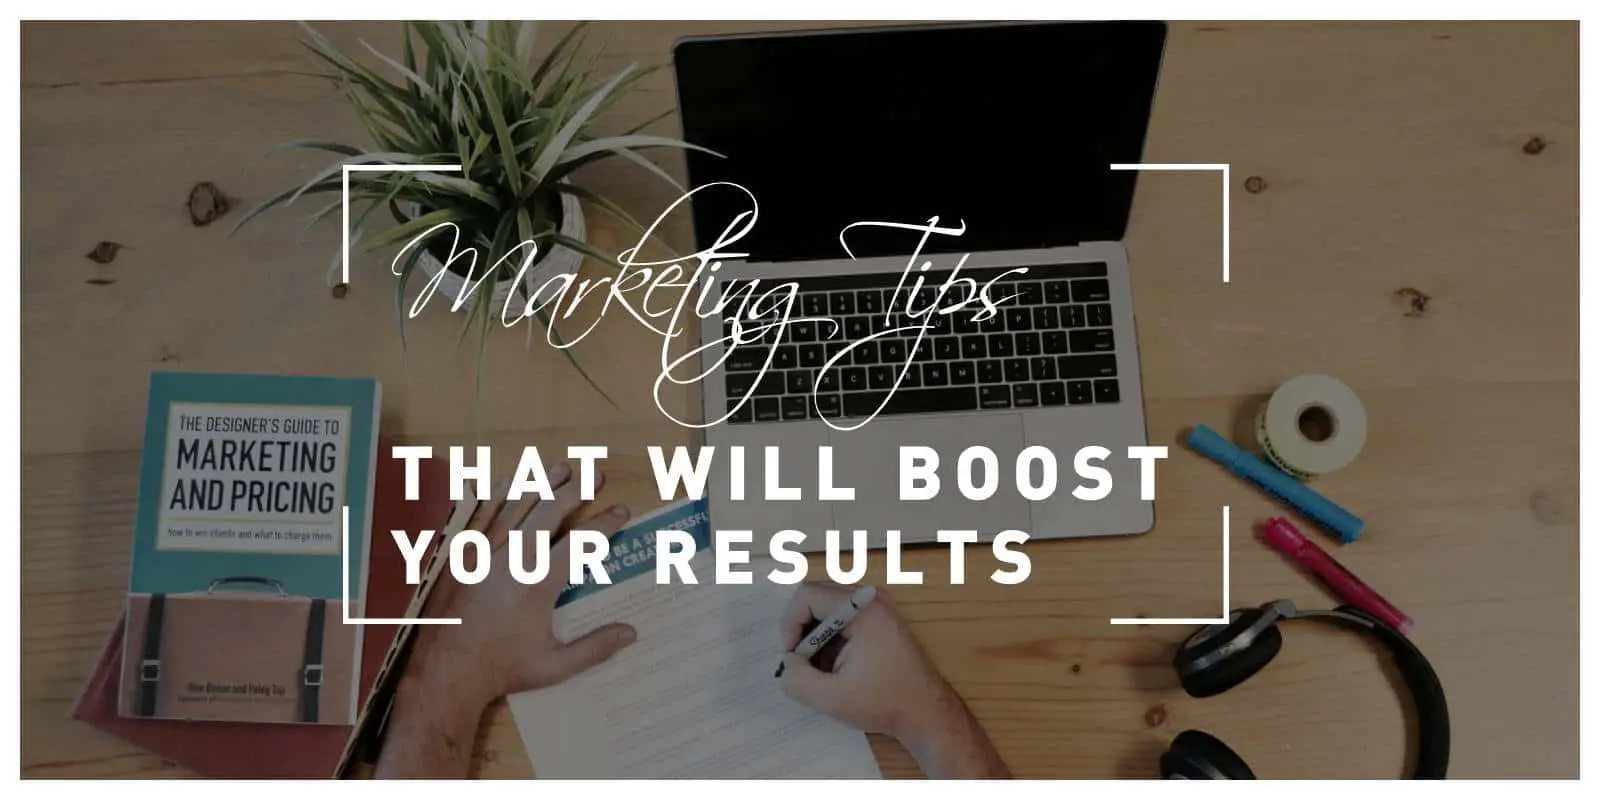 Actionable Marketing Tips That Will Boost Results